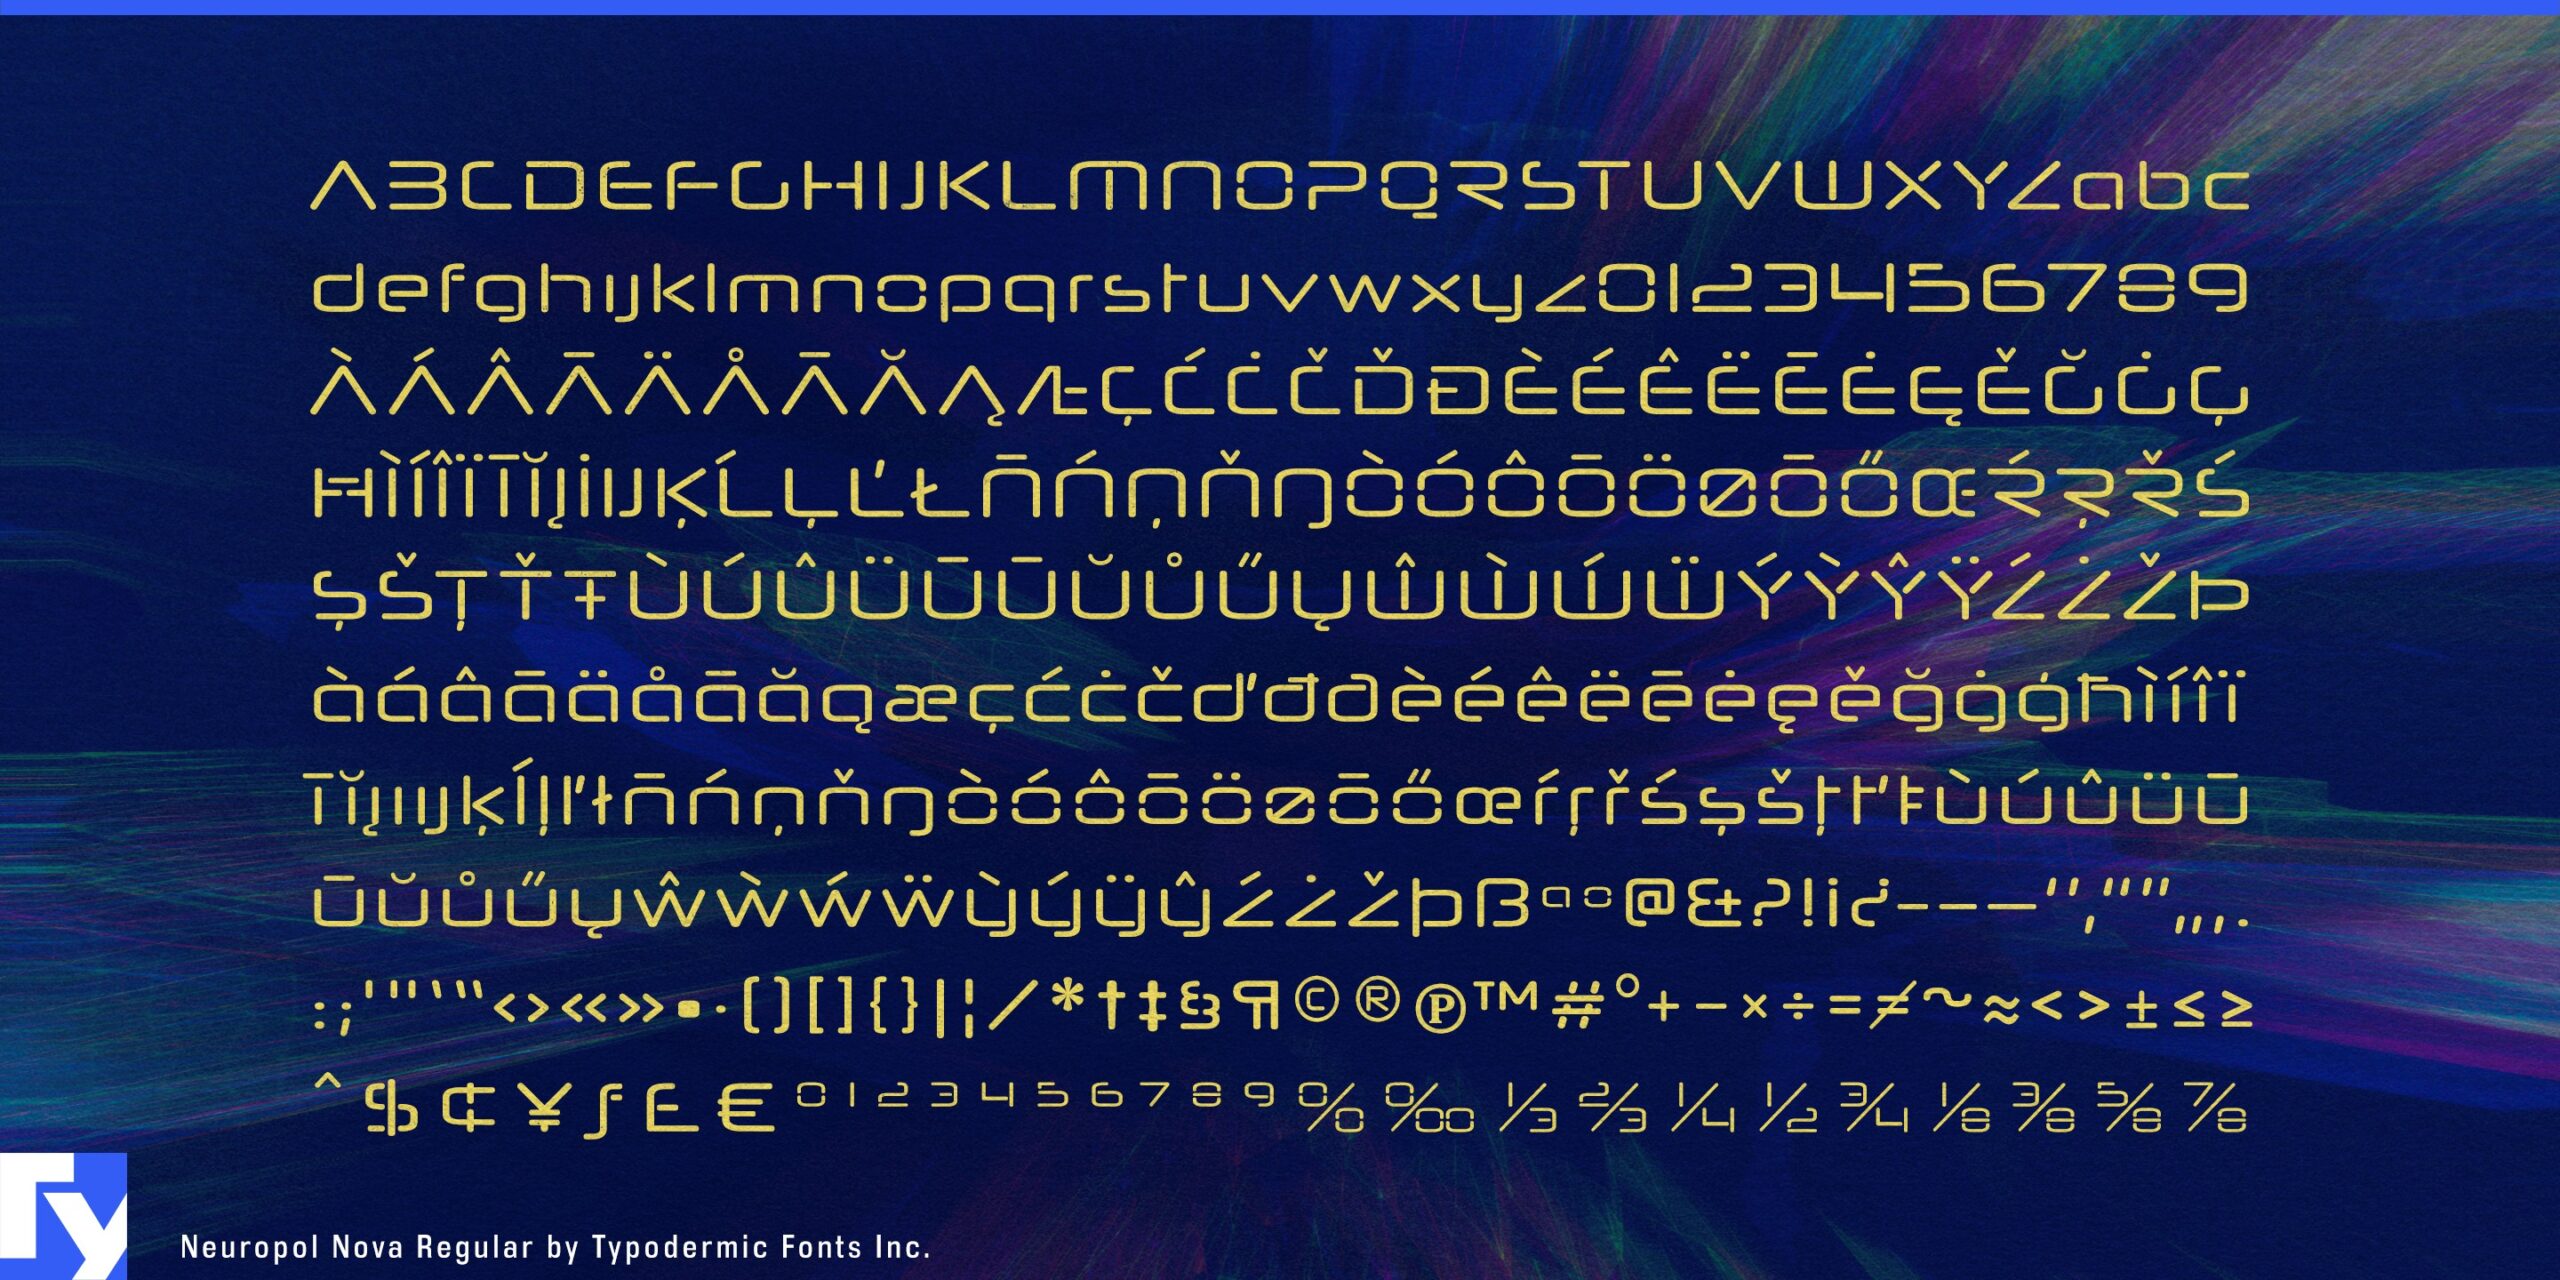 Essential Components: The Stark Aesthetic of Neuropol Nova Typeface